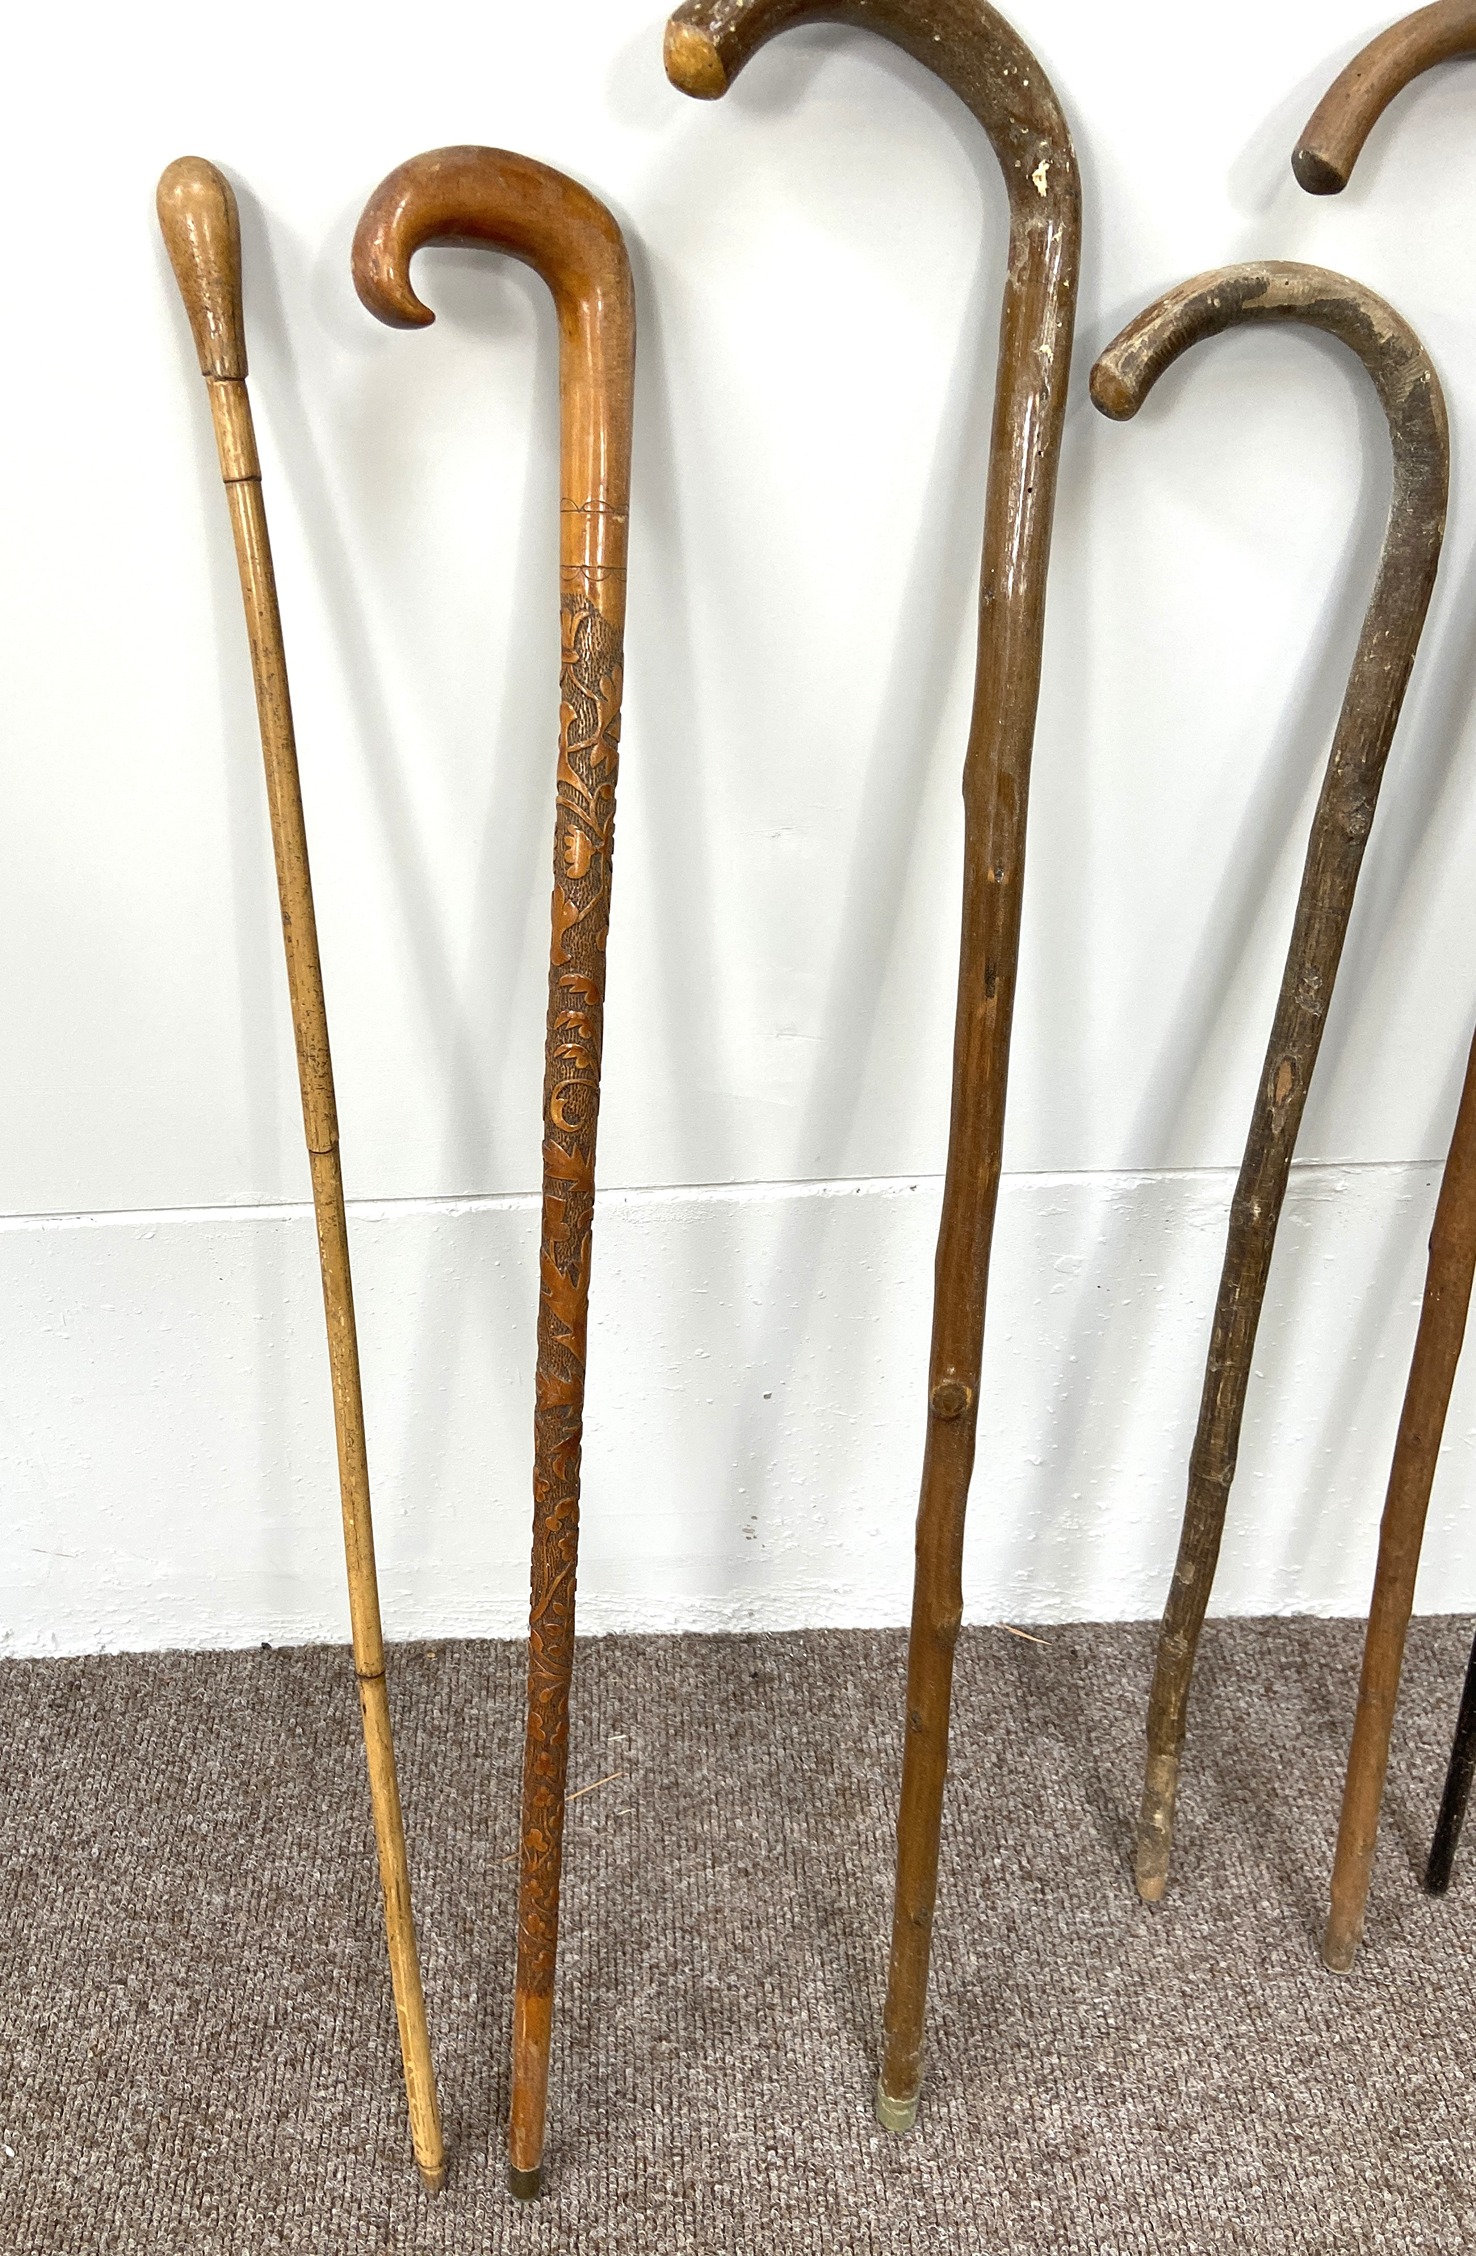 Six assorted walking sticks and canes, including an example with finely carved cane and hooked - Image 5 of 6